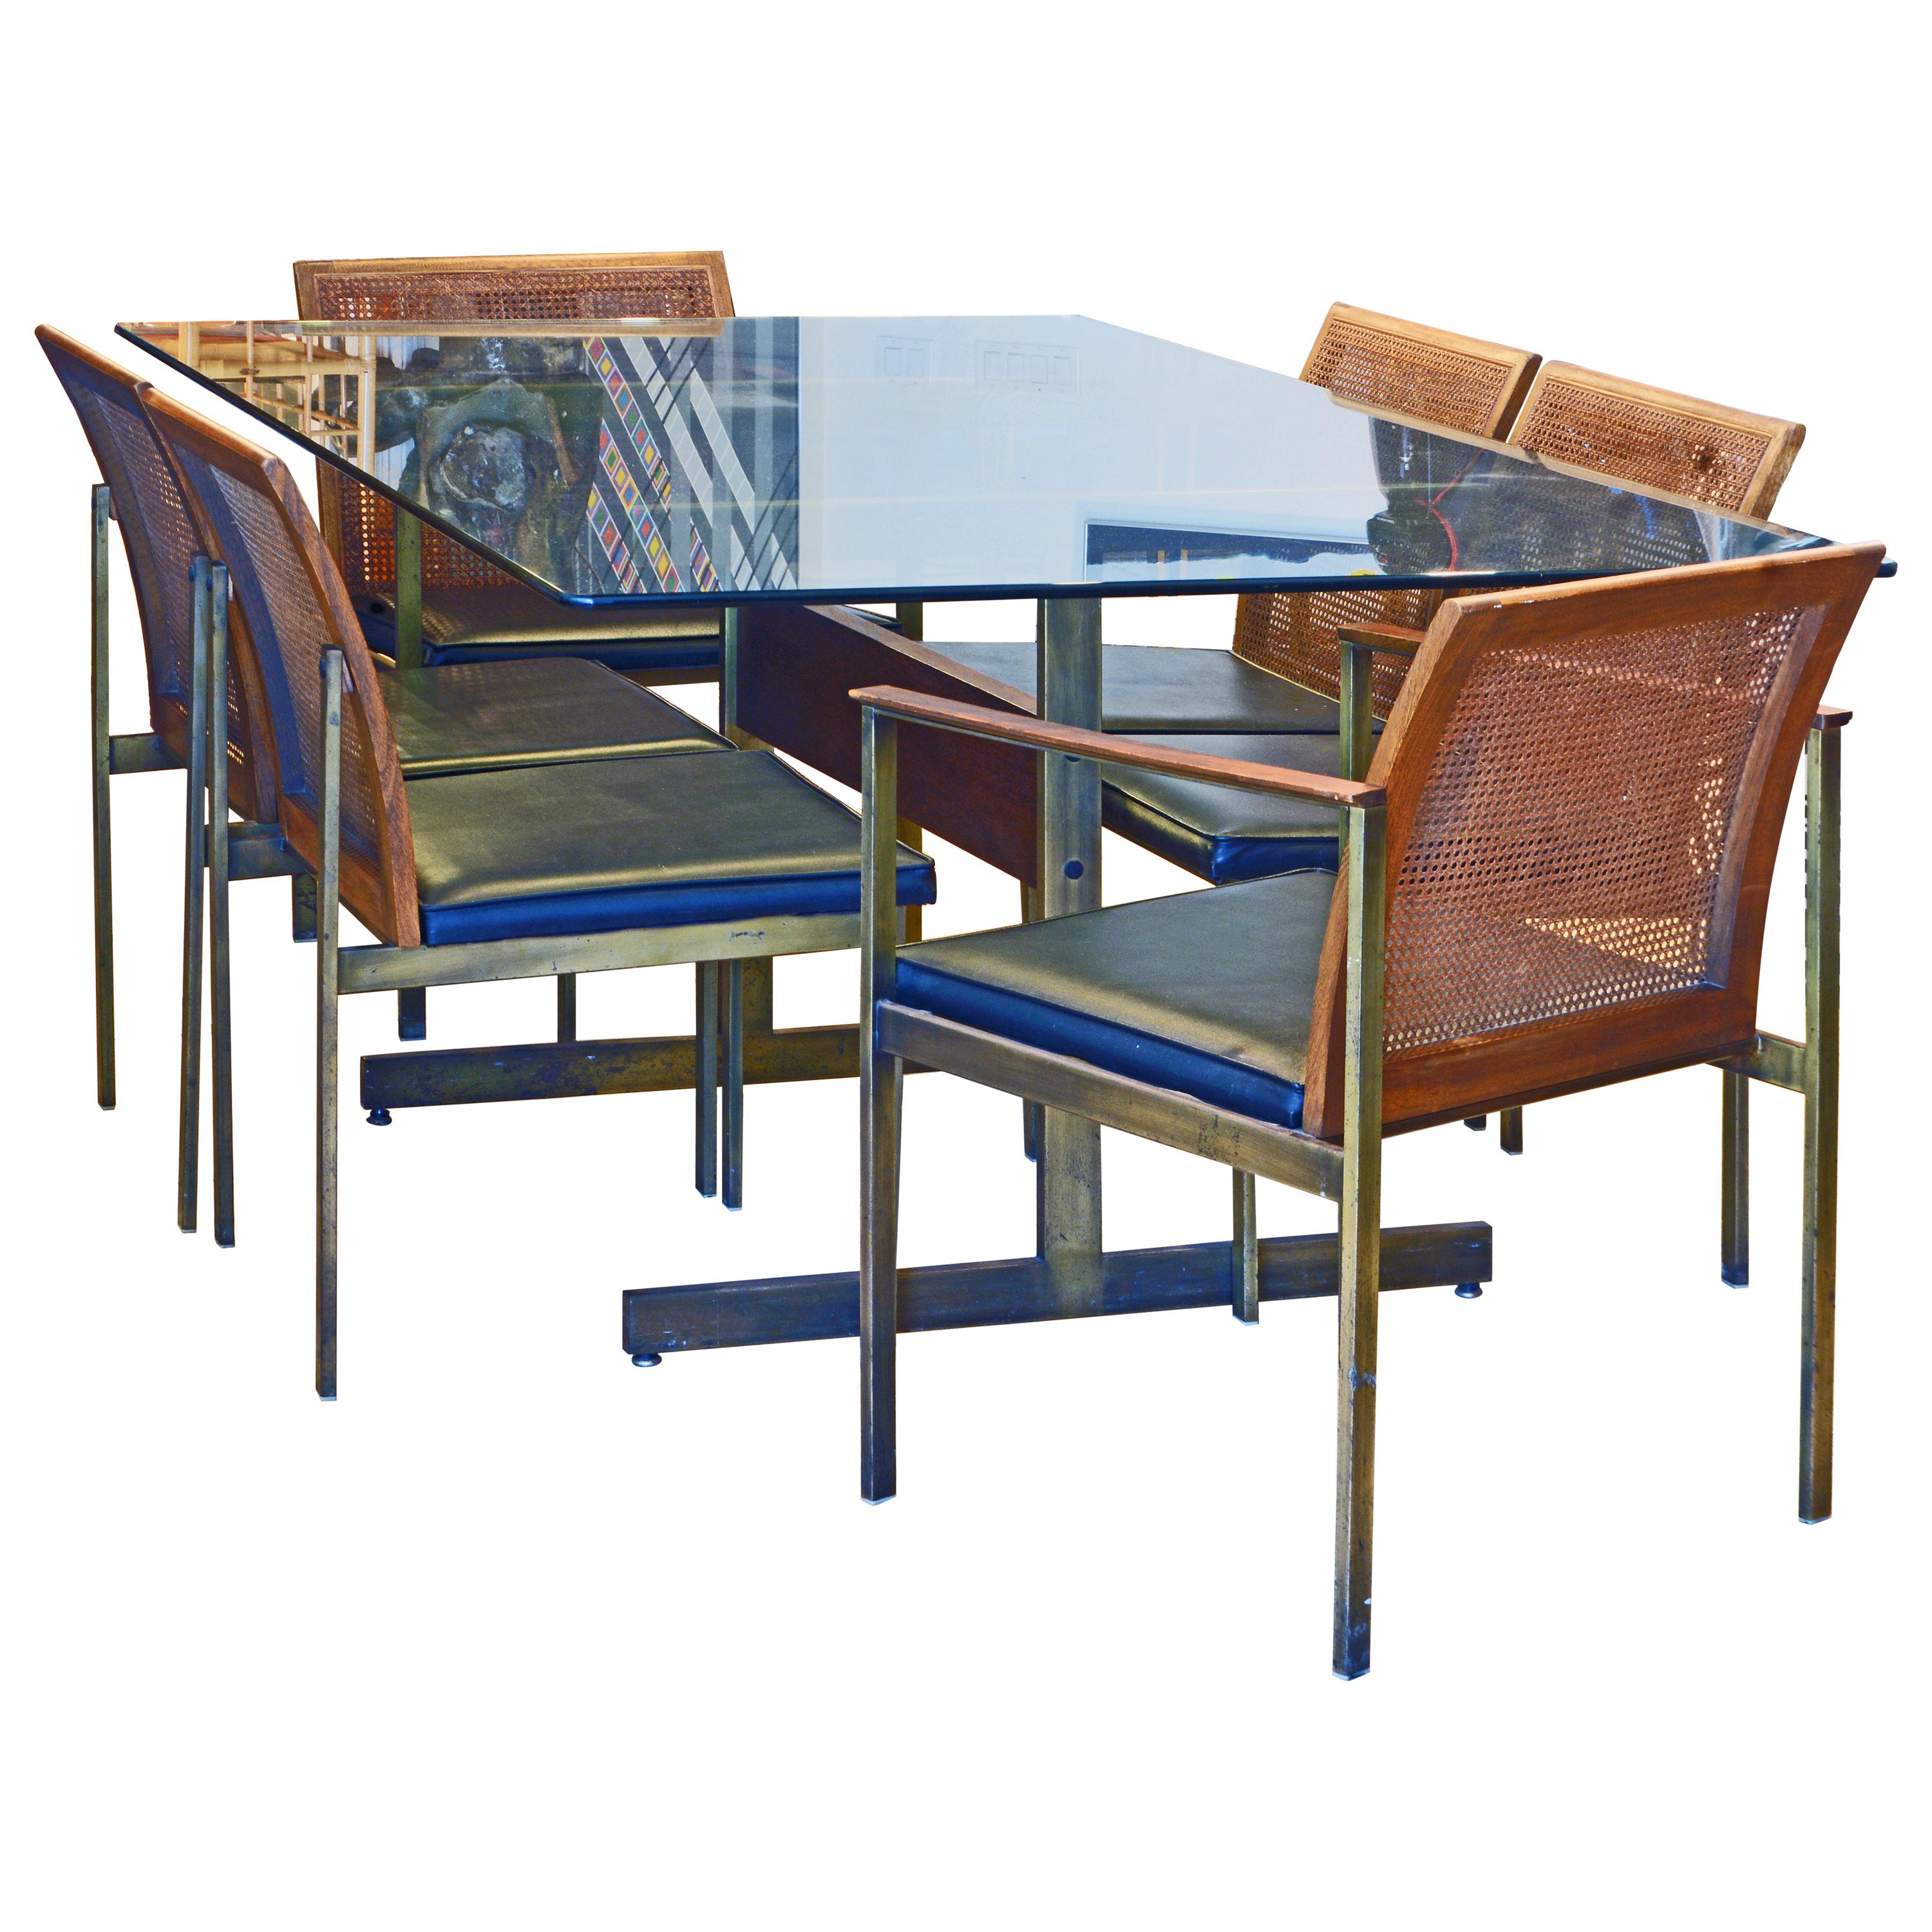 Midcentury Glass Dining Table and 6 Chairs by Lane Attributed to Paul McCobb